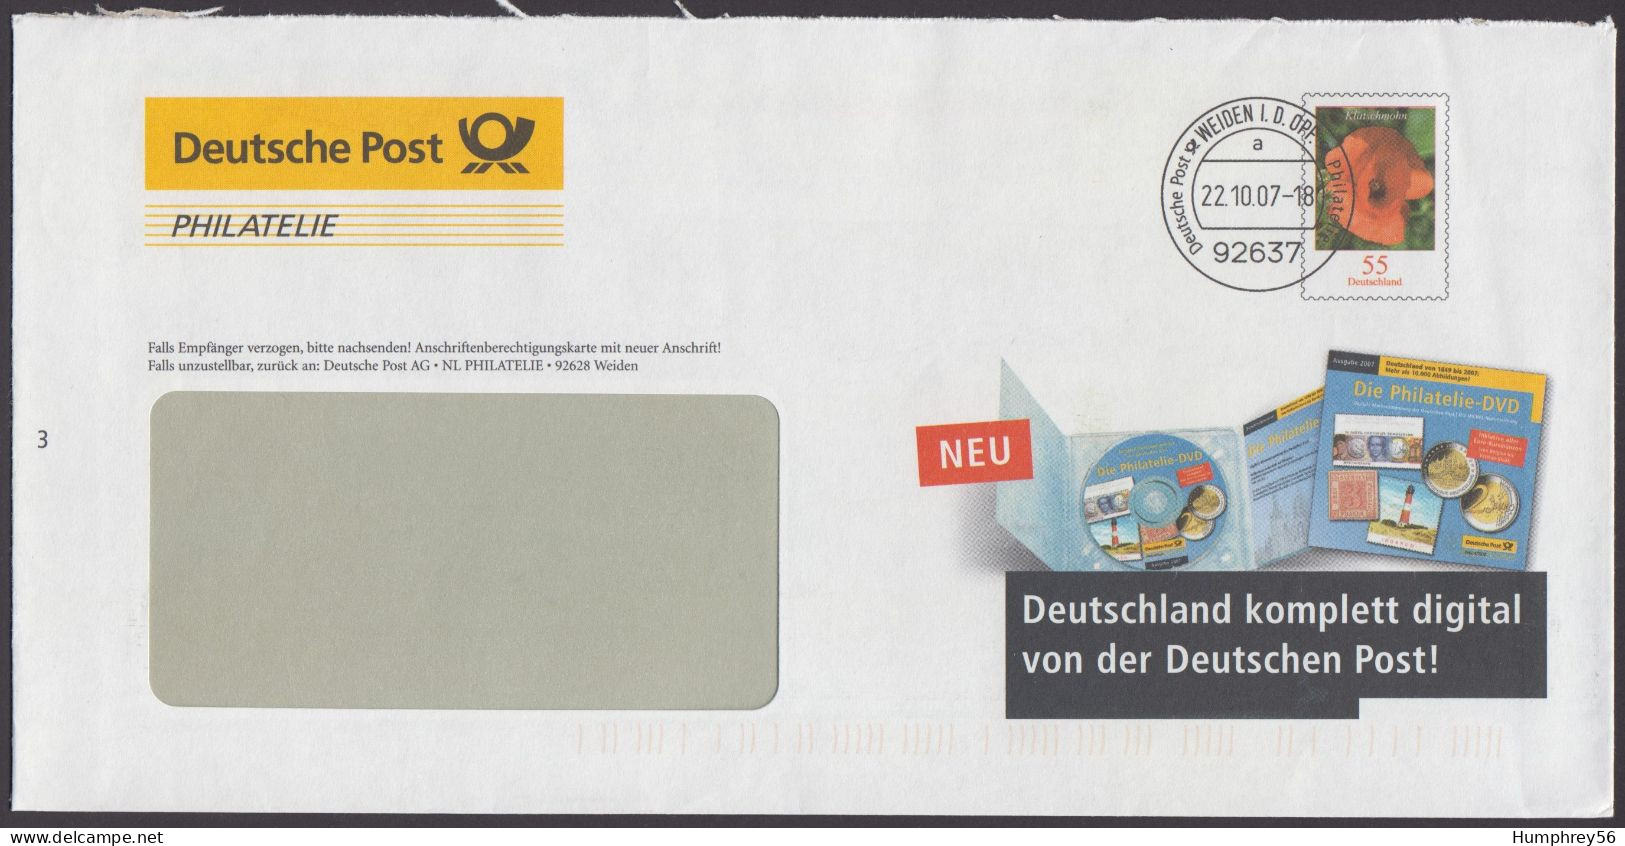 2007 - GERMANY - Cover [Postal Stationery] "The Philately DVD" [Michel F250] + WEIDEN - Private Covers - Used